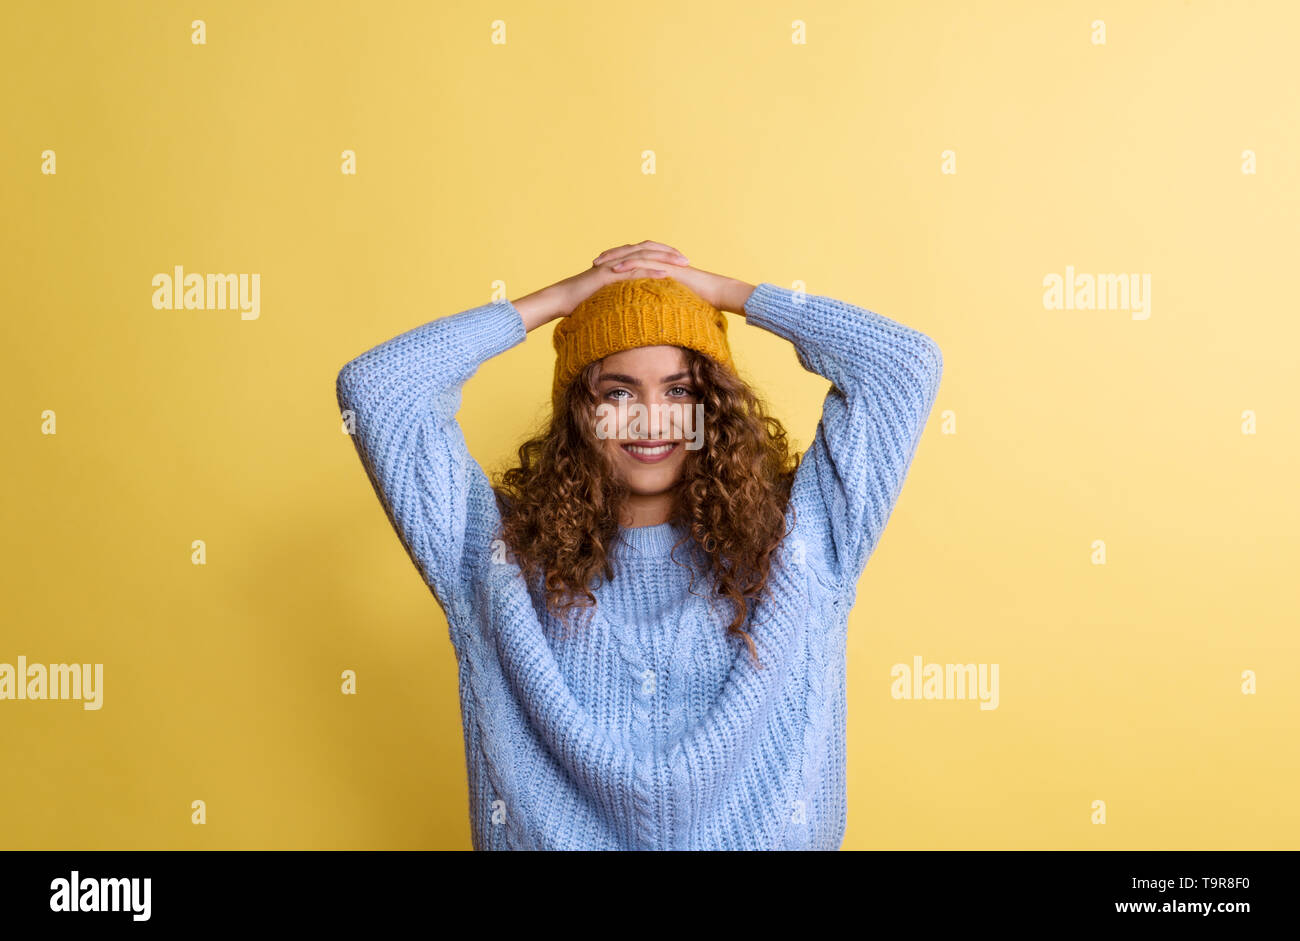 Portrait of a young woman with woolen hat in a studio on a yellow background. Stock Photo